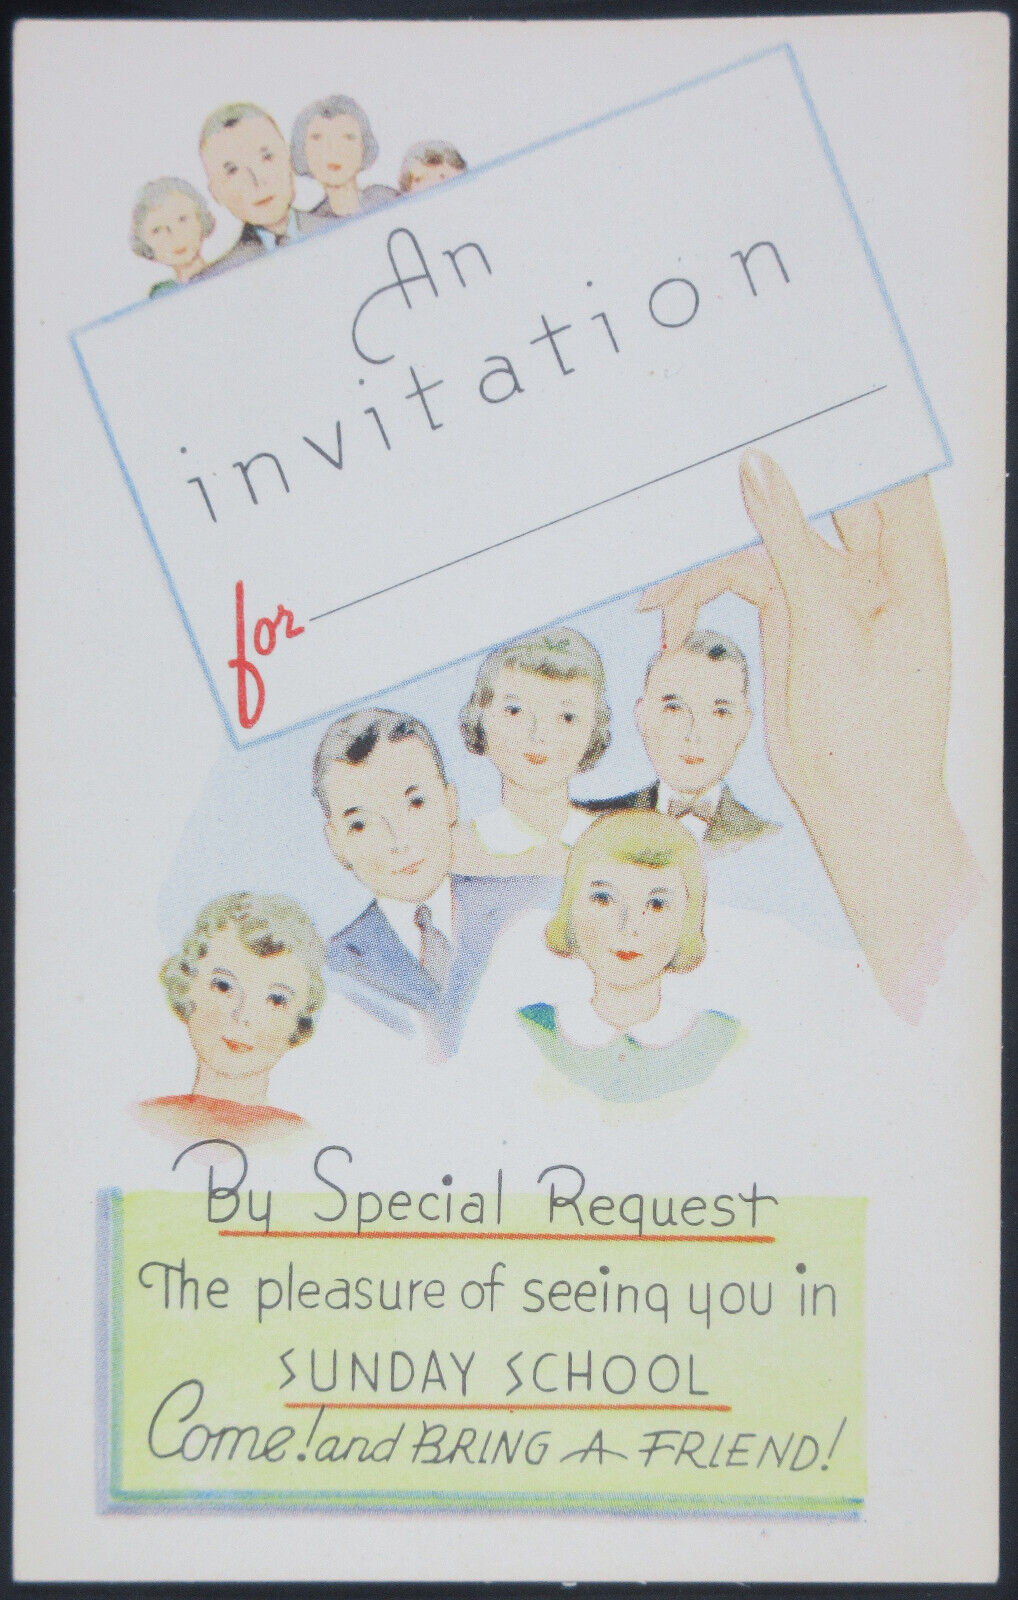 “An Invitation for__, By Special Request” Note in Hand - No. 222 M.P.C. USA